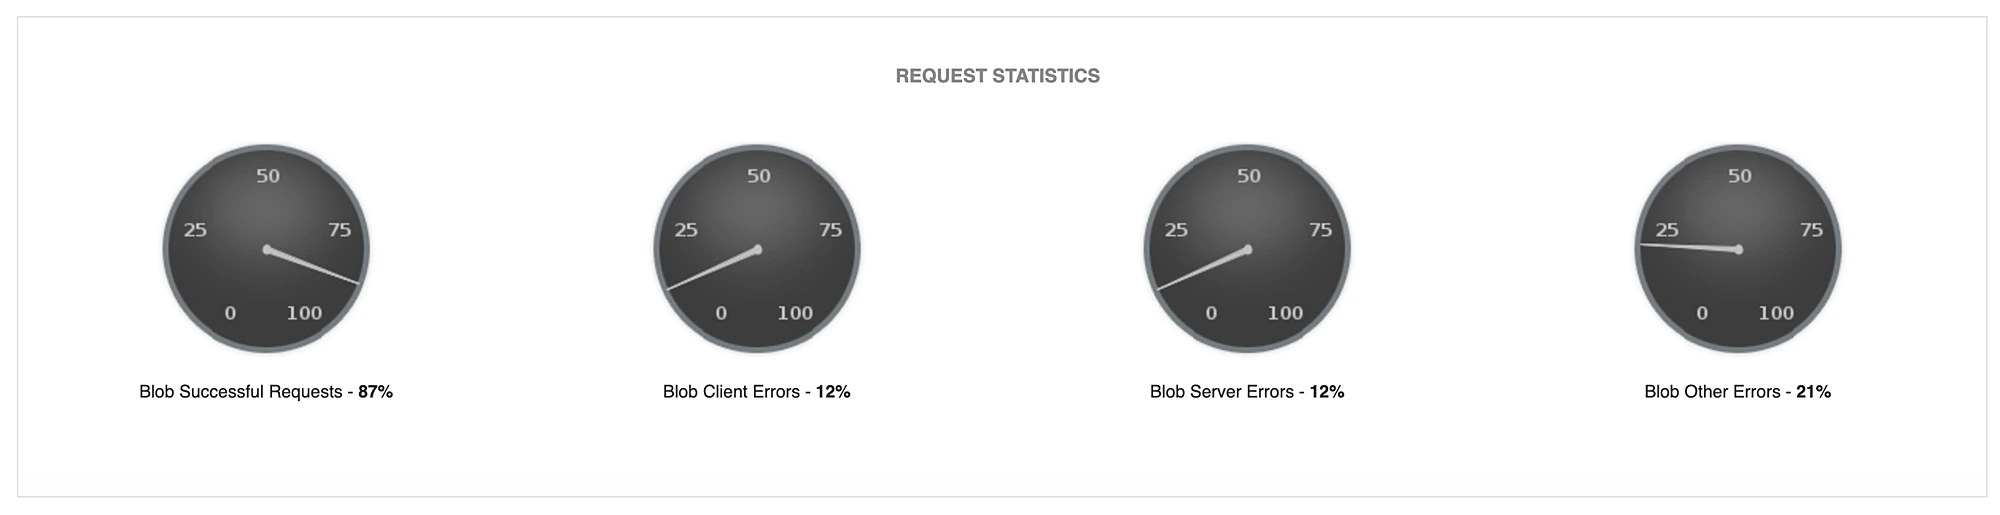 Multiple meters that show the request statistics of Azure blog storage service